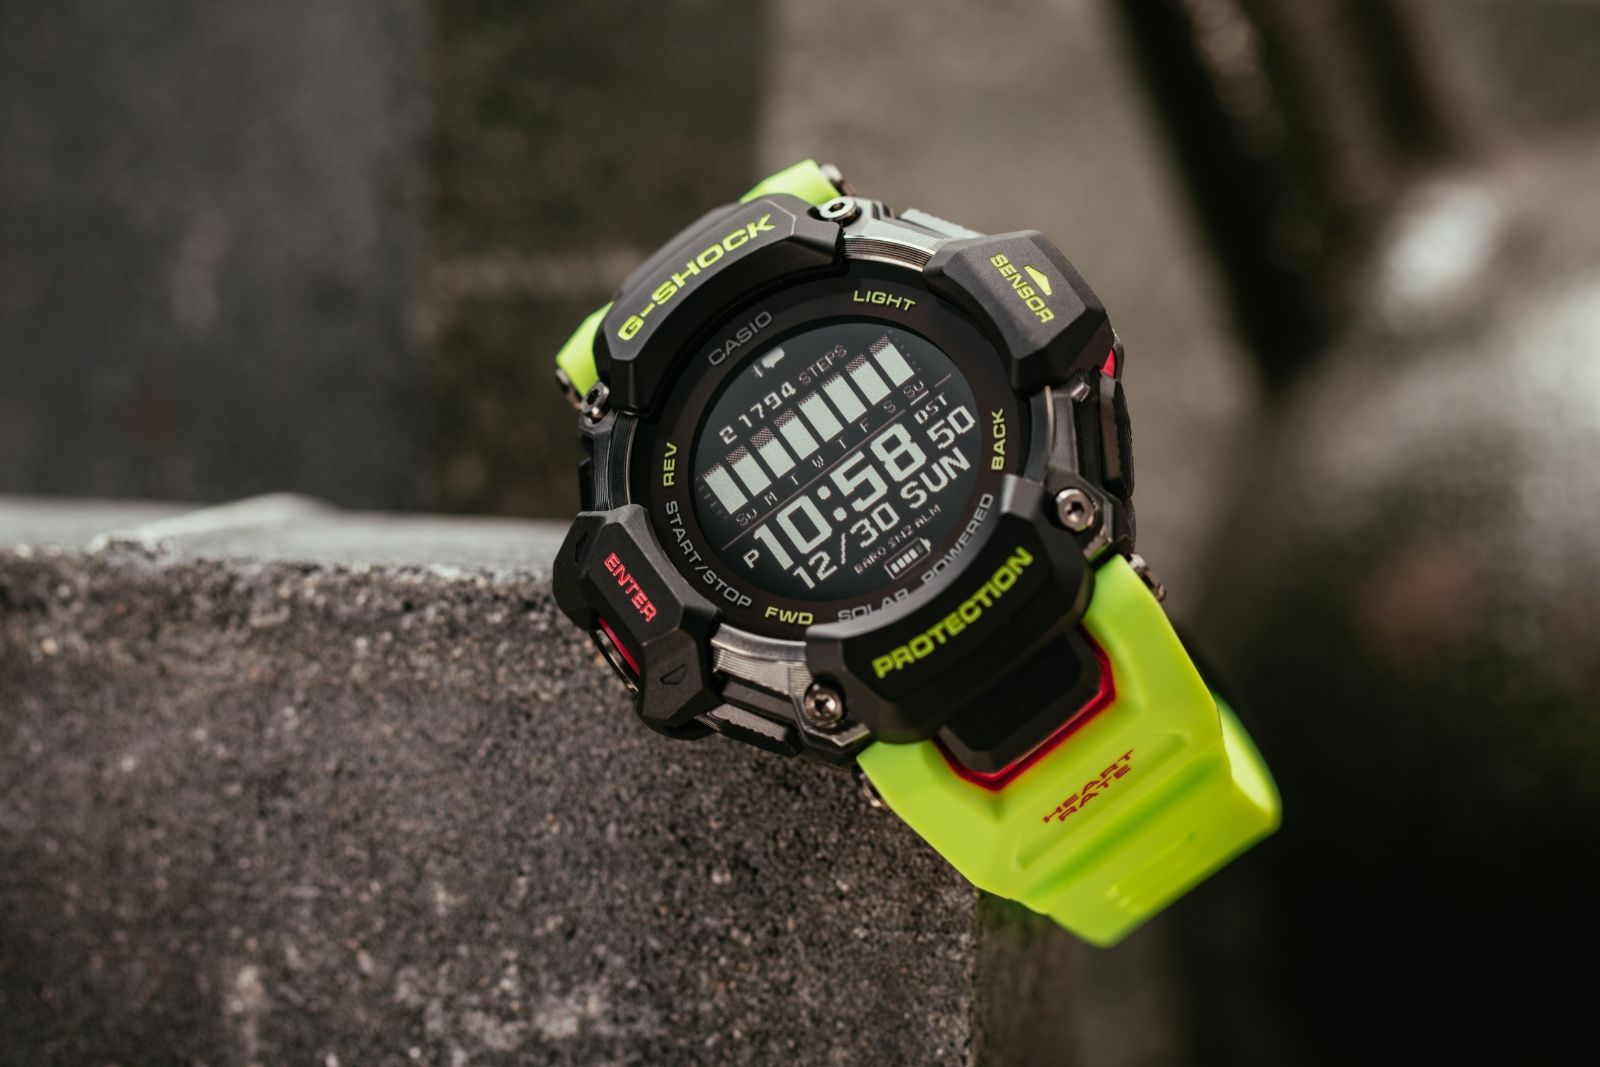 Casio G-Shock GBD-H2000 is brand's most accomplished smart sportswatch yet